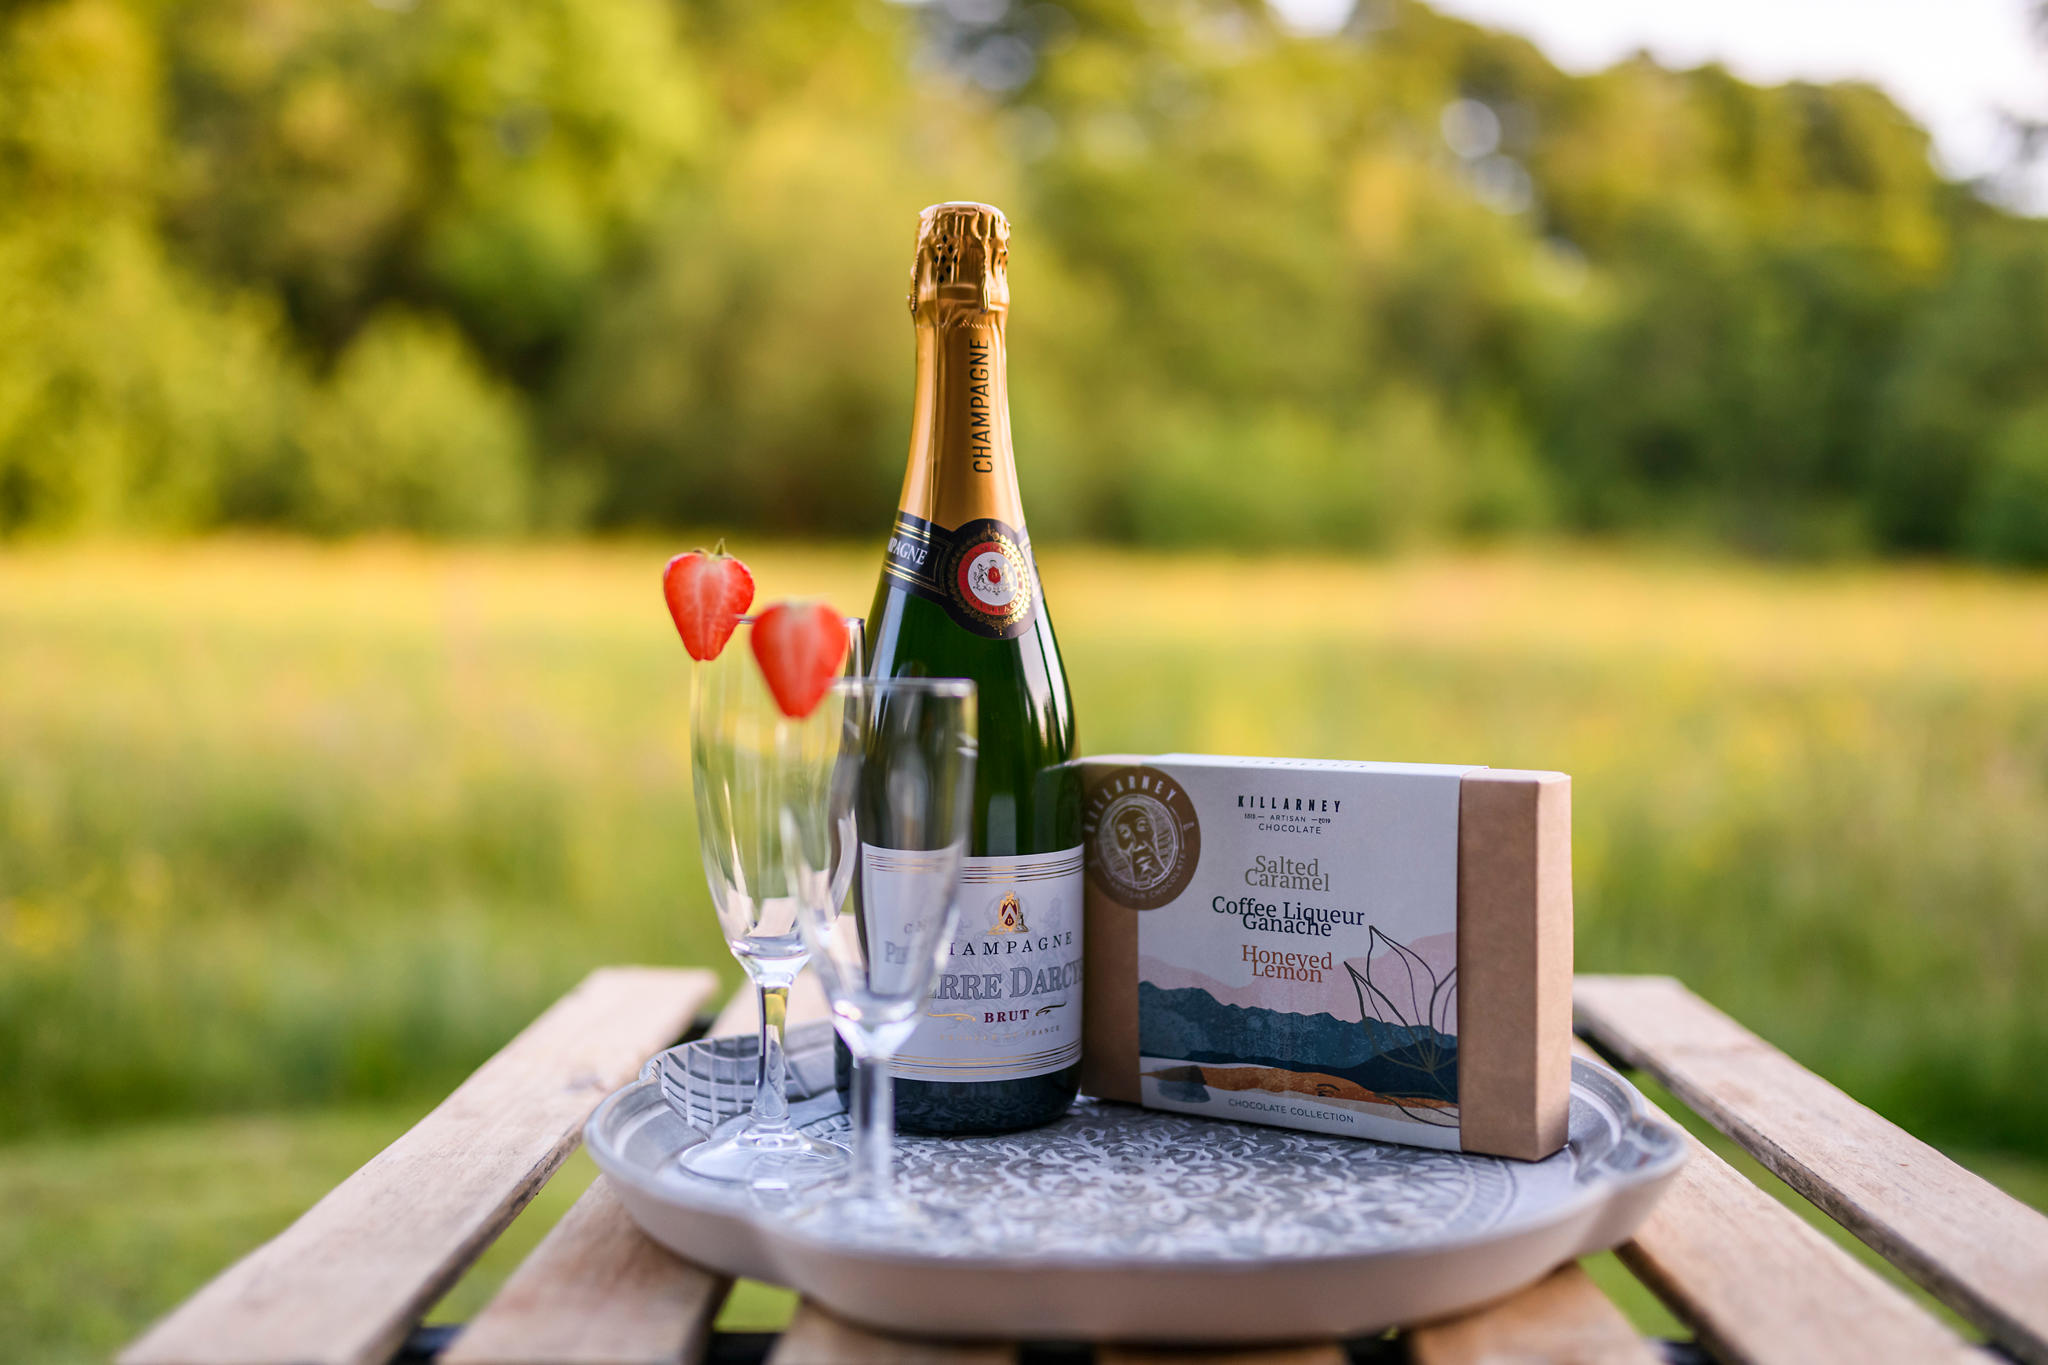 For Killarney Special Occasions they are delighted to provide a selection of upgrades from Prosecco  Killarney Glamping At The Grove Kerry 087 975 0110